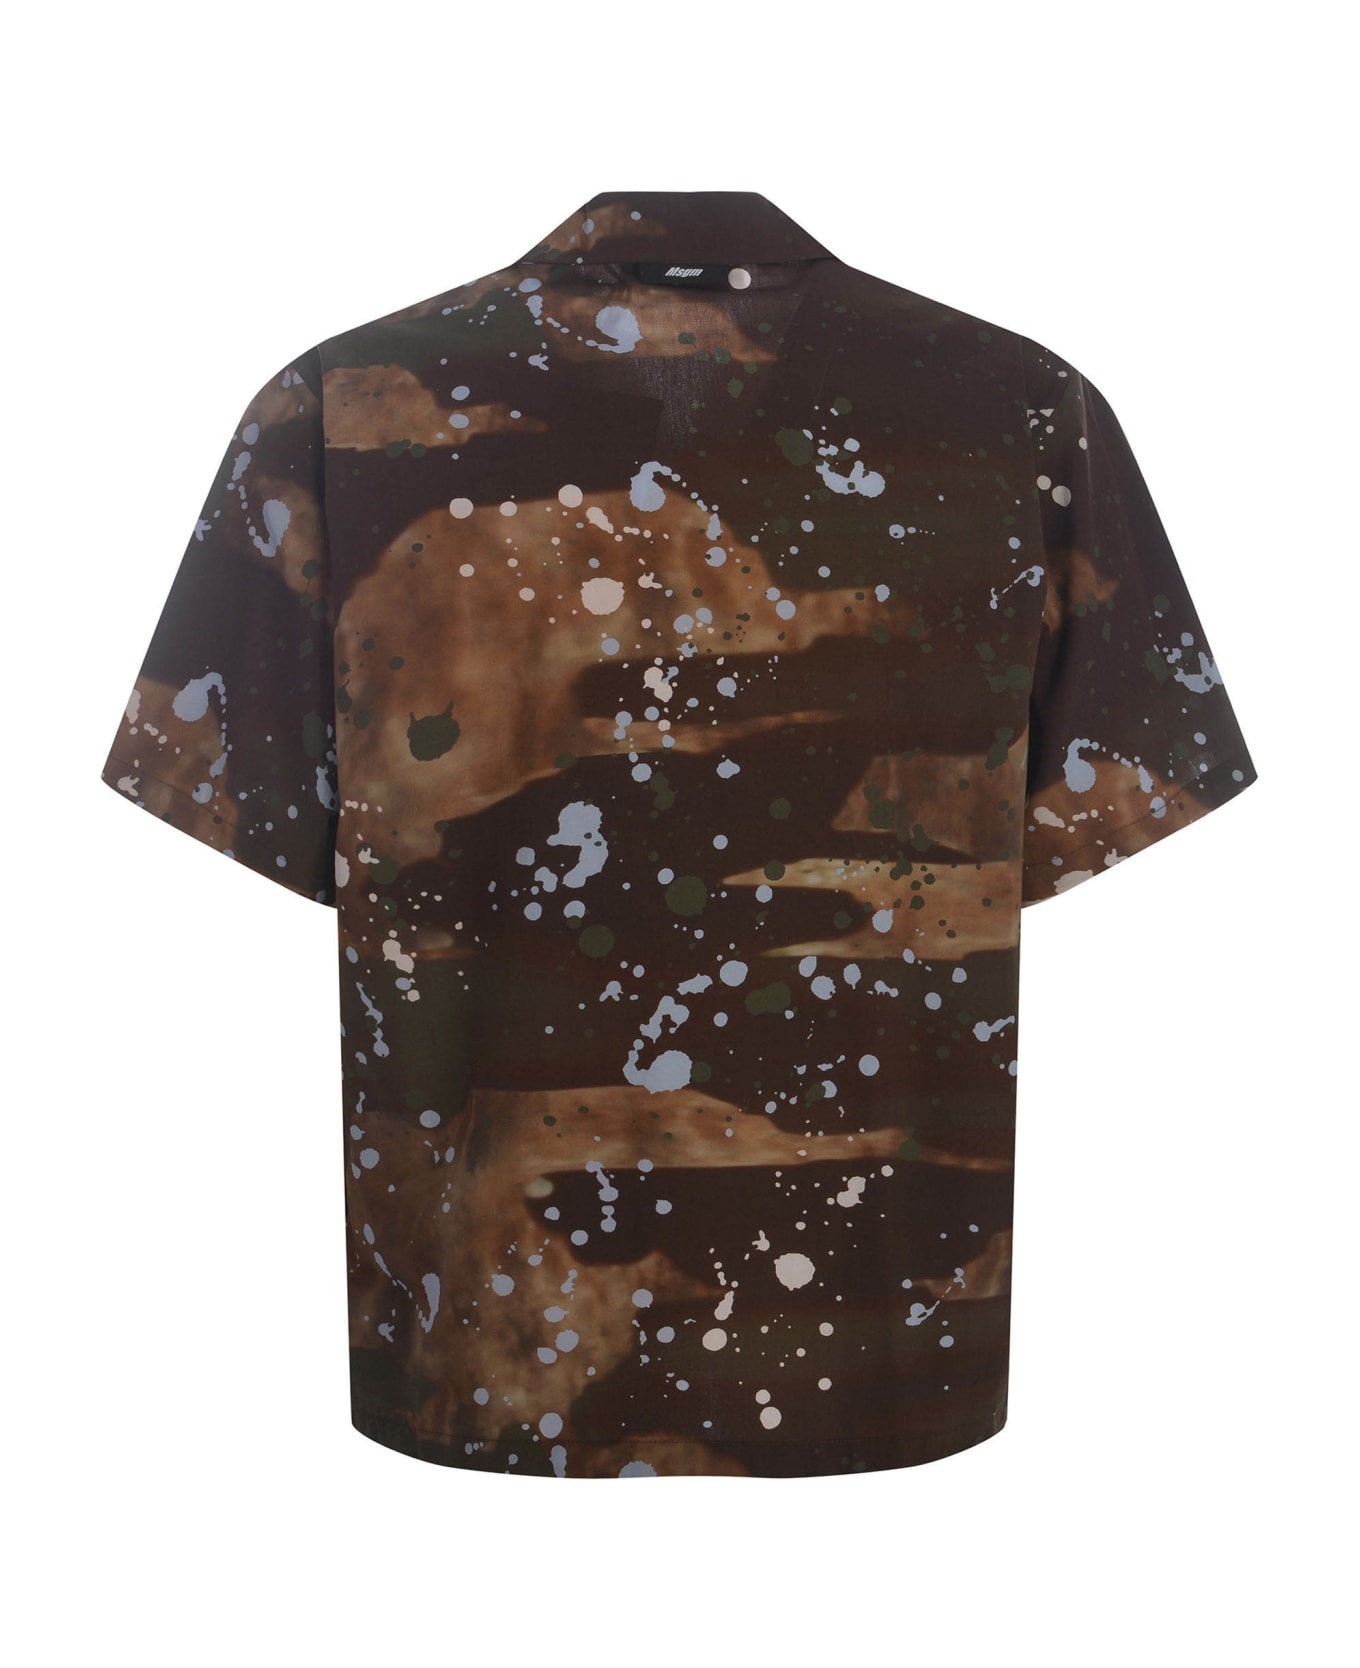 MSGM Shirt Msgm "dripping Camo" Made Of Cotton - Camouflage marrone シャツ